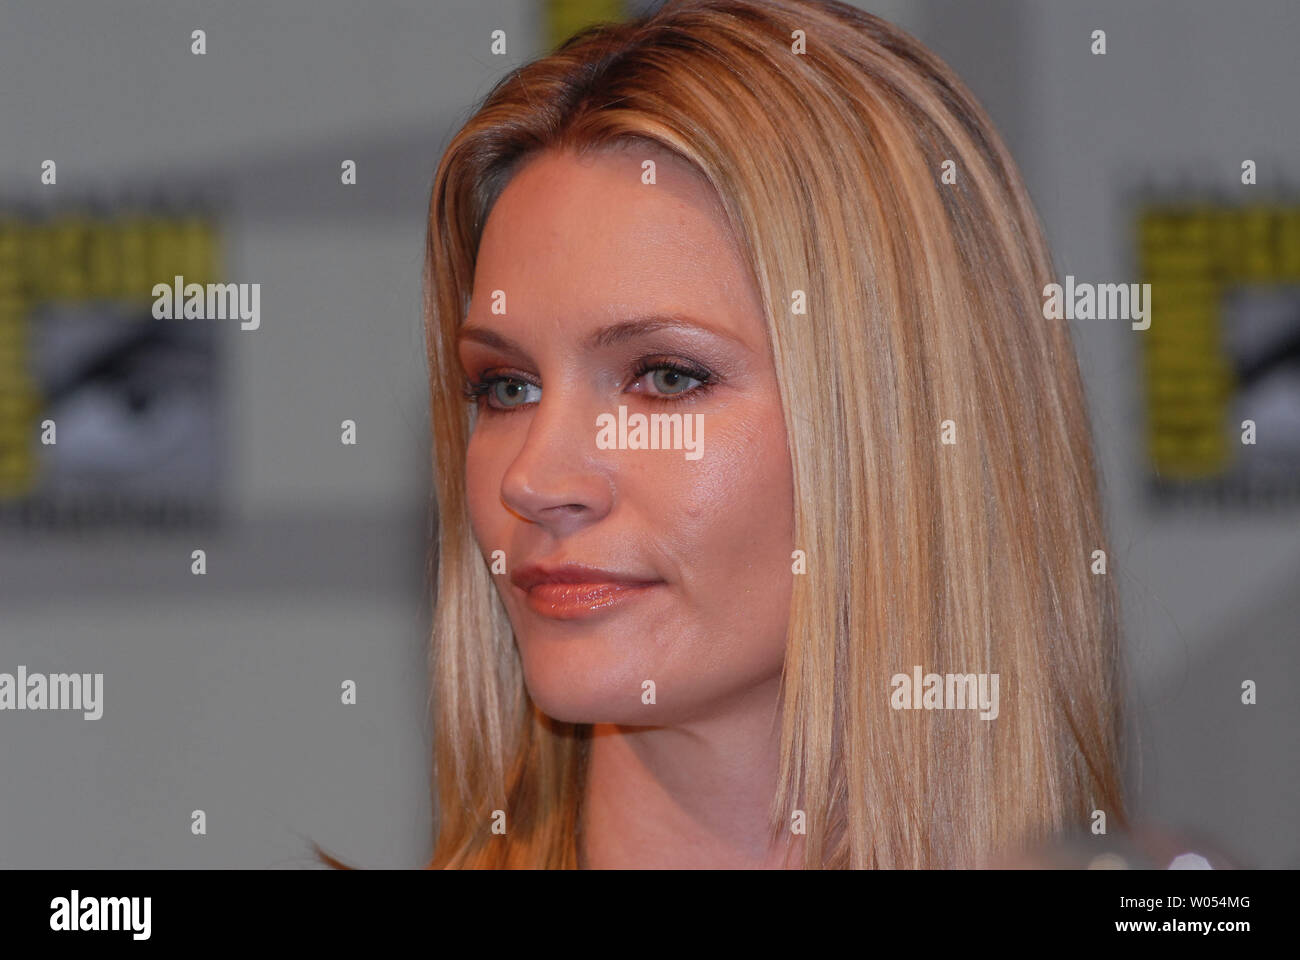 Actress Natasha Henstridge attends the 40th annual Comic-Con International, the largest comic book and pop culture event in North America, at the San Diego Convention Center on July 23, 2009. (UPI Photo/Earl Cryer) Stock Photo